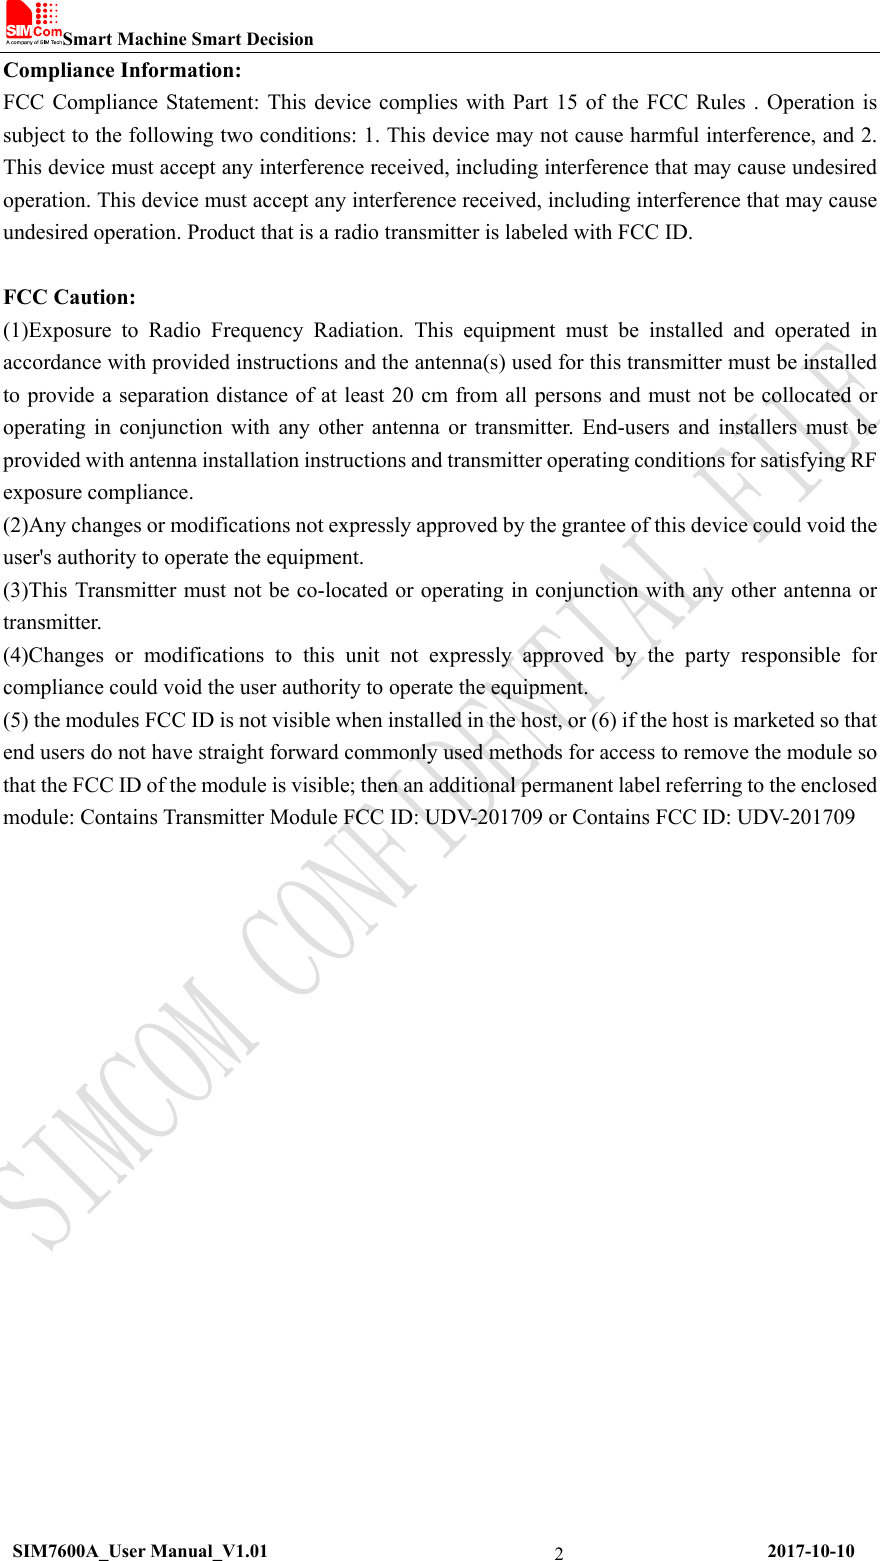 Smart Machine Smart Decision  SIM7600A_User Manual_V1.01                                                     2017-10-10 2Compliance Information: FCC Compliance Statement: This device complies with Part 15 of the FCC Rules . Operation is subject to the following two conditions: 1. This device may not cause harmful interference, and 2. This device must accept any interference received, including interference that may cause undesired operation. This device must accept any interference received, including interference that may cause undesired operation. Product that is a radio transmitter is labeled with FCC ID.    FCC Caution:   (1)Exposure to Radio Frequency Radiation. This equipment must be installed and operated in accordance with provided instructions and the antenna(s) used for this transmitter must be installed to provide a separation distance of at least 20 cm from all persons and must not be collocated or operating in conjunction with any other antenna or transmitter. End-users and installers must be provided with antenna installation instructions and transmitter operating conditions for satisfying RF exposure compliance.   (2)Any changes or modifications not expressly approved by the grantee of this device could void the user&apos;s authority to operate the equipment.   (3)This Transmitter must not be co-located or operating in conjunction with any other antenna or transmitter.  (4)Changes or modifications to this unit not expressly approved by the party responsible for compliance could void the user authority to operate the equipment.   (5) the modules FCC ID is not visible when installed in the host, or (6) if the host is marketed so that end users do not have straight forward commonly used methods for access to remove the module so that the FCC ID of the module is visible; then an additional permanent label referring to the enclosed module: Contains Transmitter Module FCC ID: UDV-201709 or Contains FCC ID: UDV-201709      